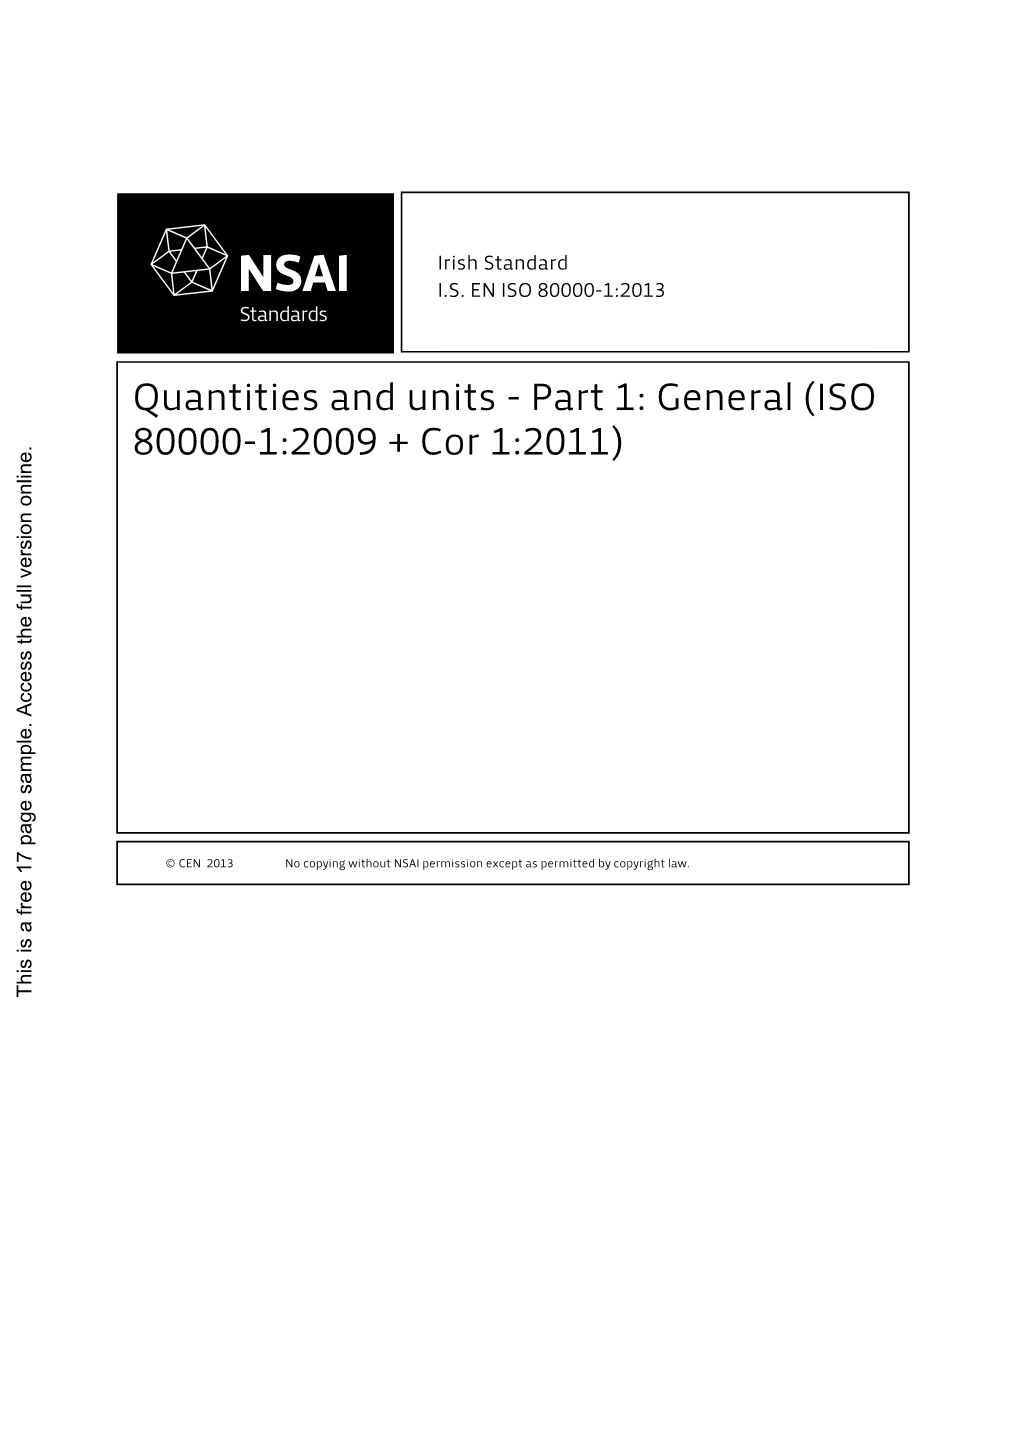 Quantities and Units - Part 1: General (ISO 80000-1:2009 + Cor 1:2011)